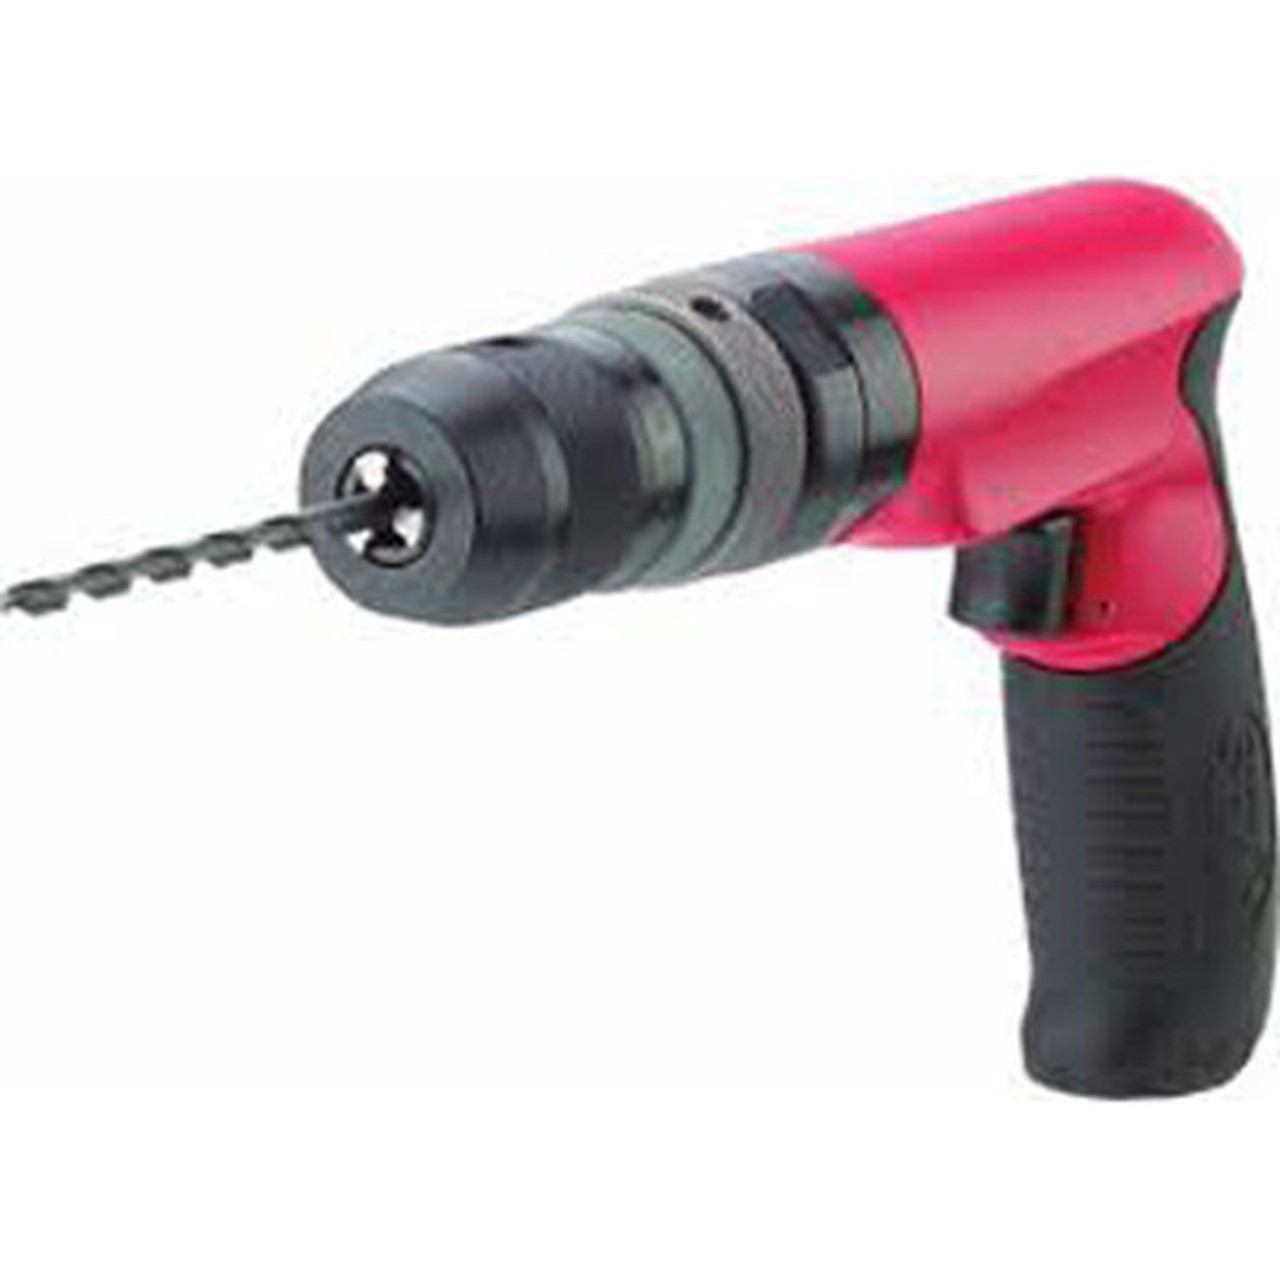 Sioux Tools SDR10P26NK3 Non-Reversible Pistol Grip Drill or 1 HP or 2600 RPM or 3/8 Keyless Chuck